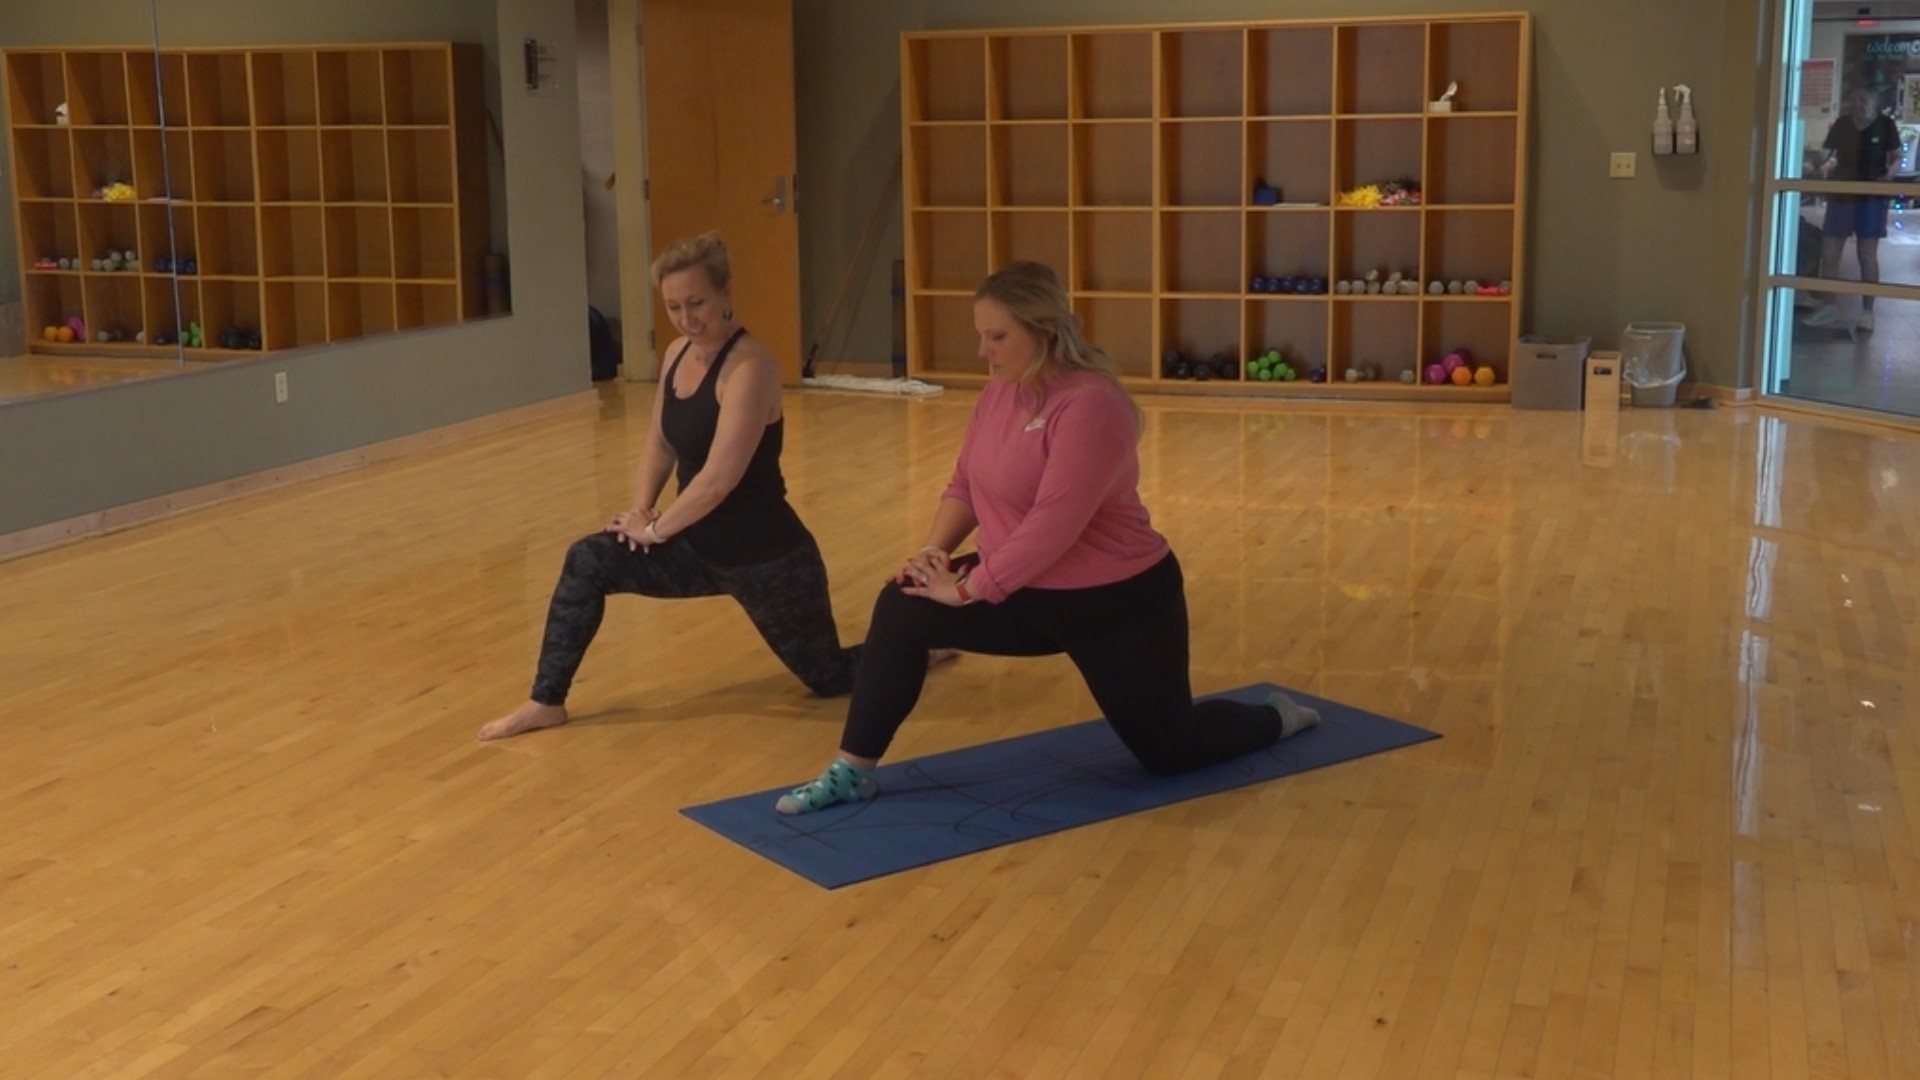 Focusing on flexibility in this week's FitMinute to help with other classic moves in the gym, like squats or deadlifts!